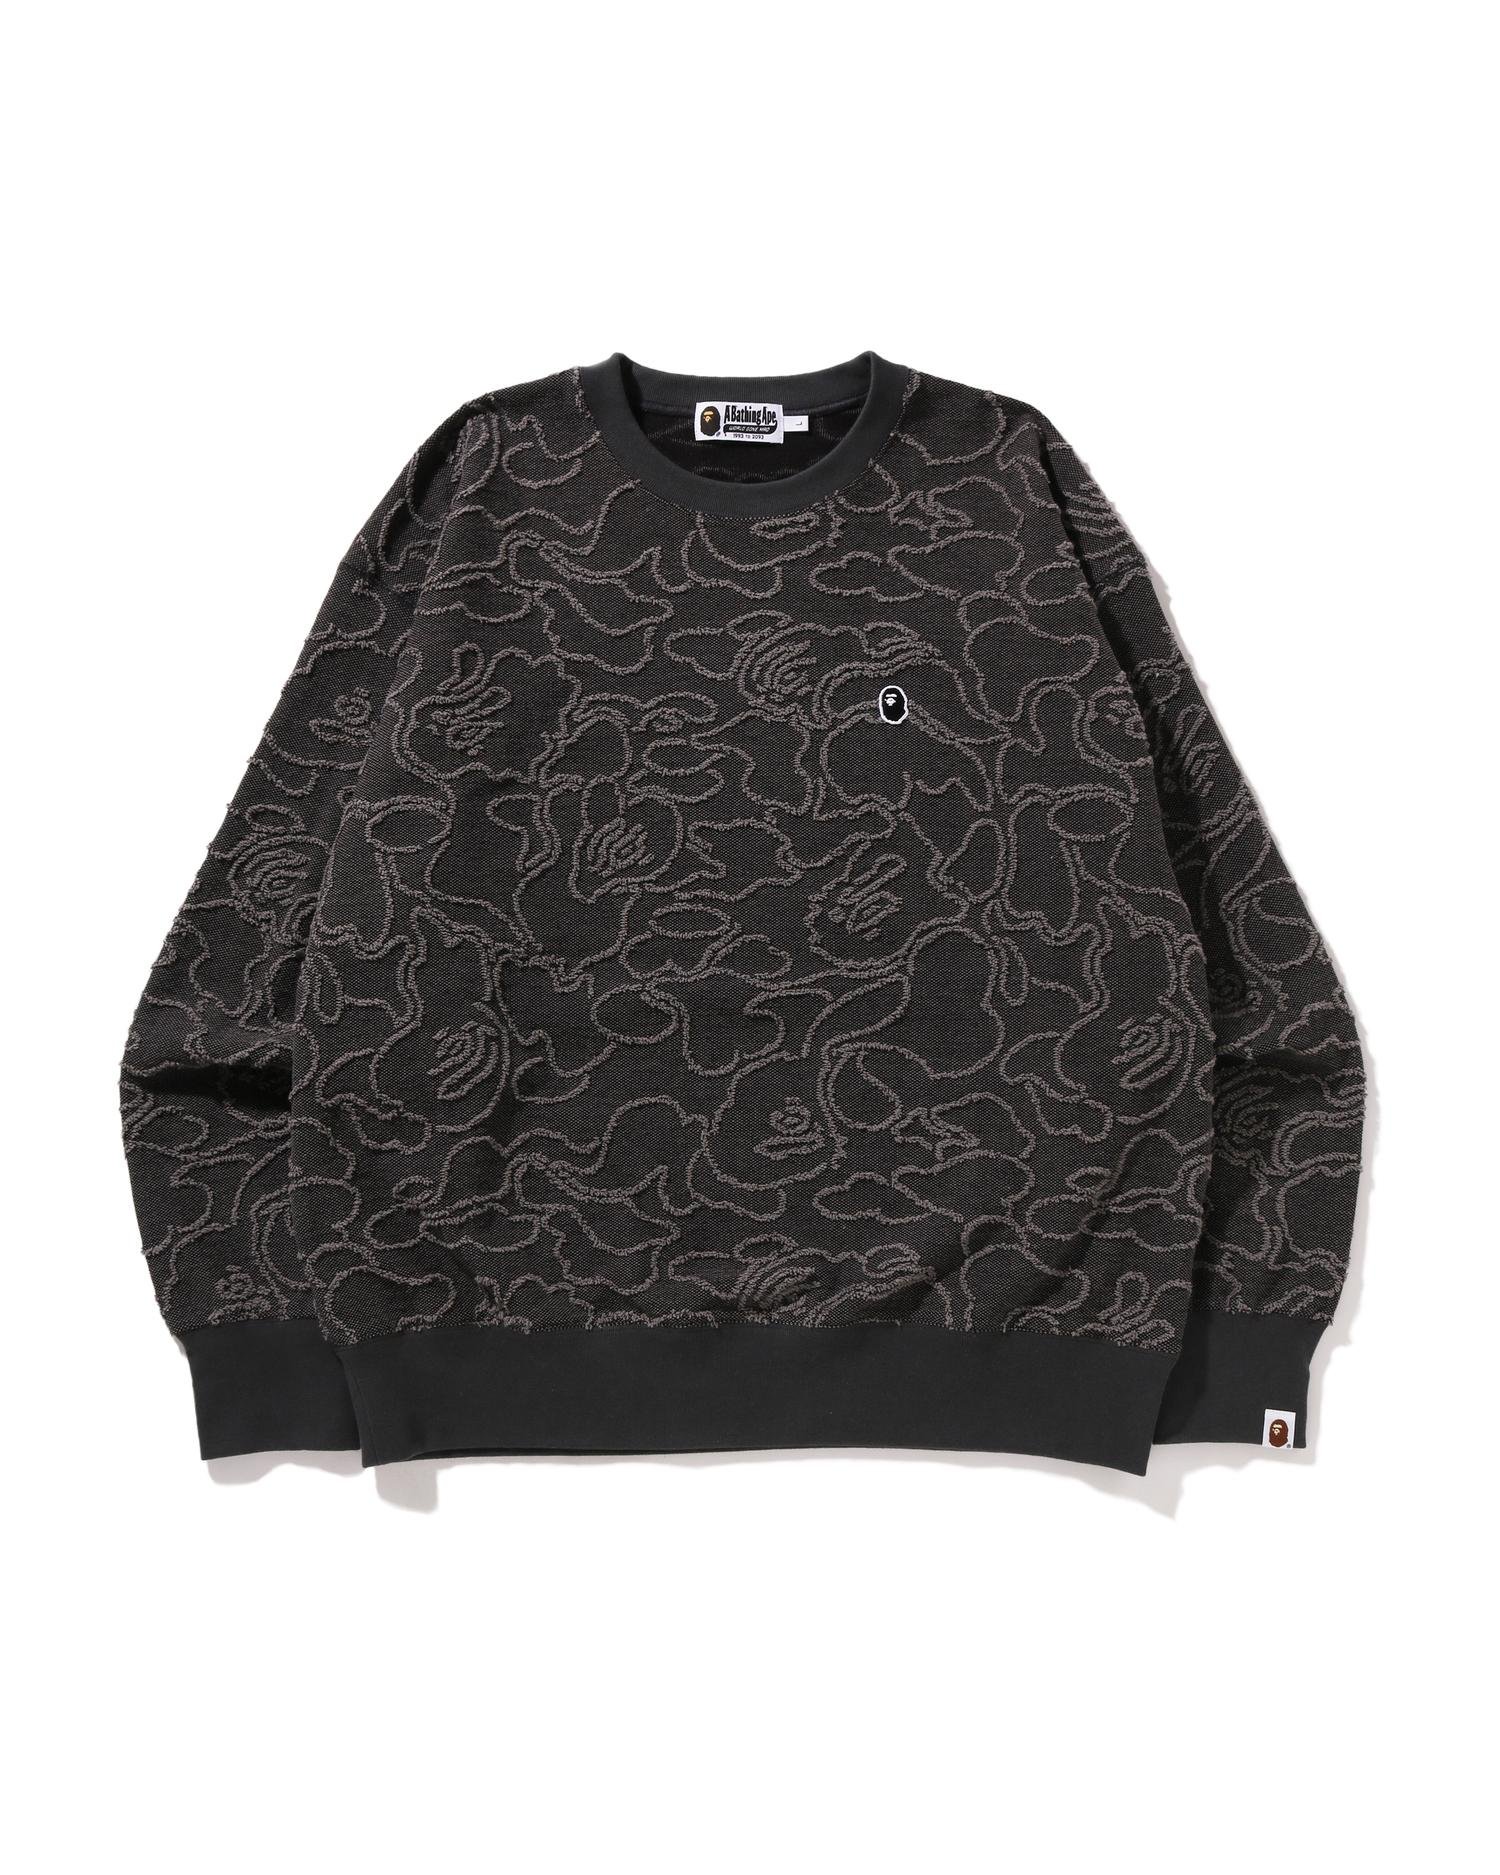 Neon Camo Jacquard Relaxed Fit Crewneck by BAPE